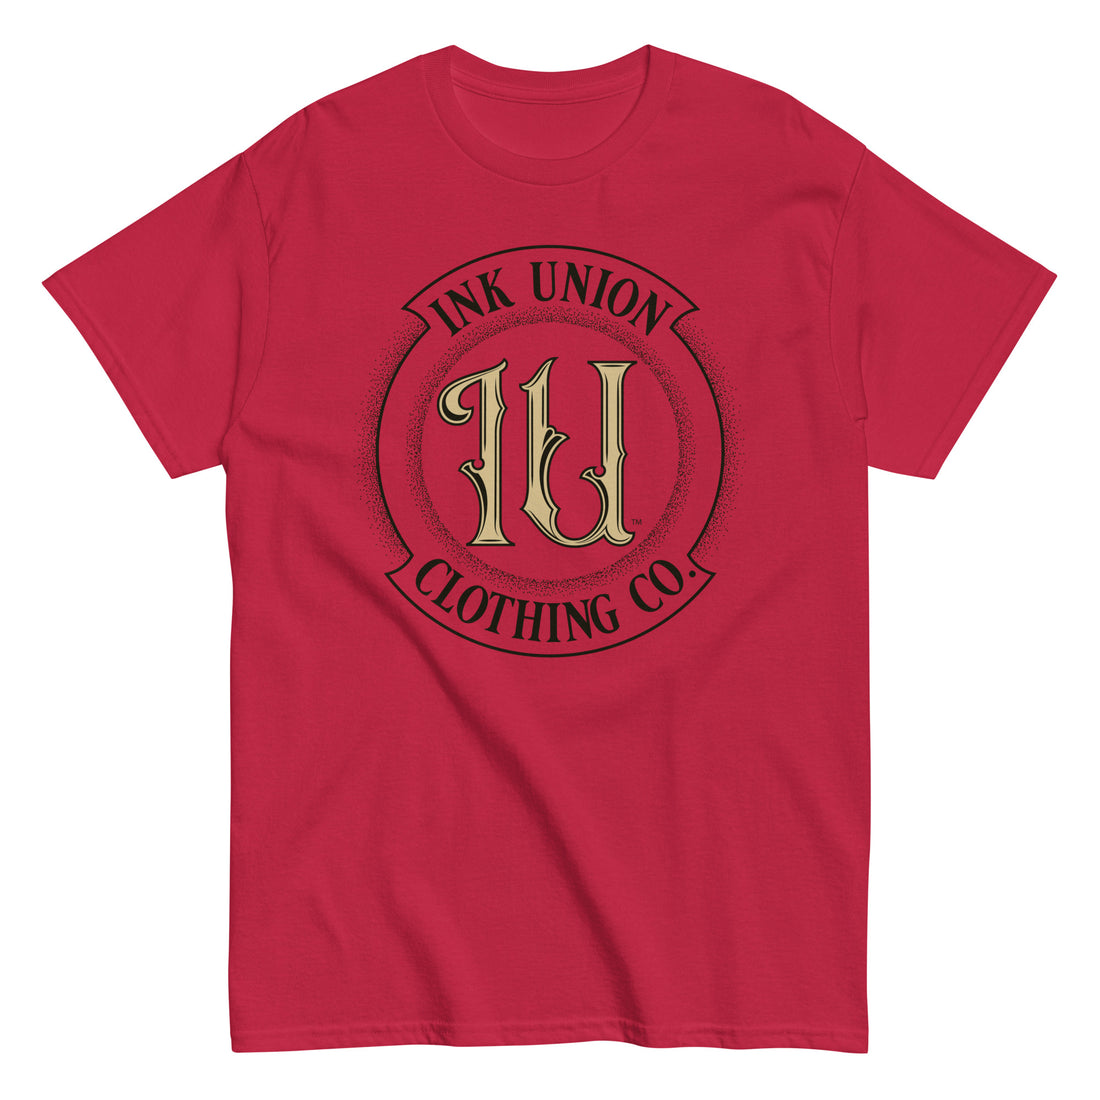 A cardinal red t-shirt with the Ink Union Clothing Co Badge logo in black and gold centered on the front of the shirt.